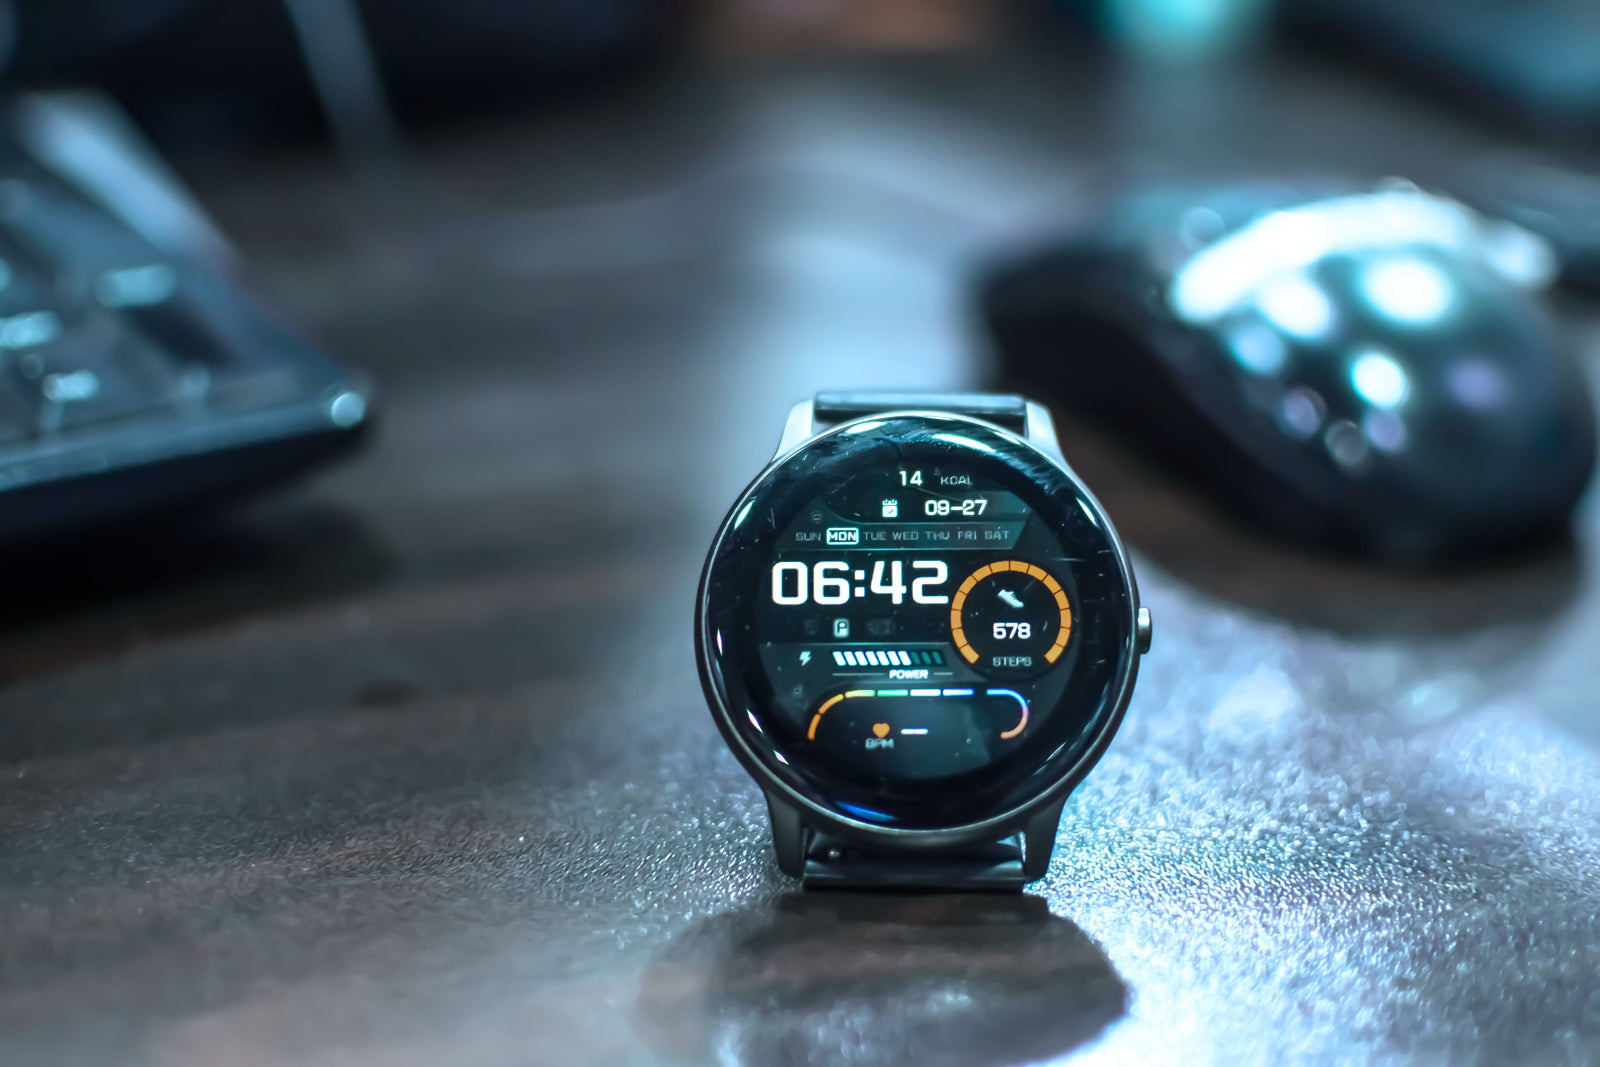 Which smartwatch has the best battery life?